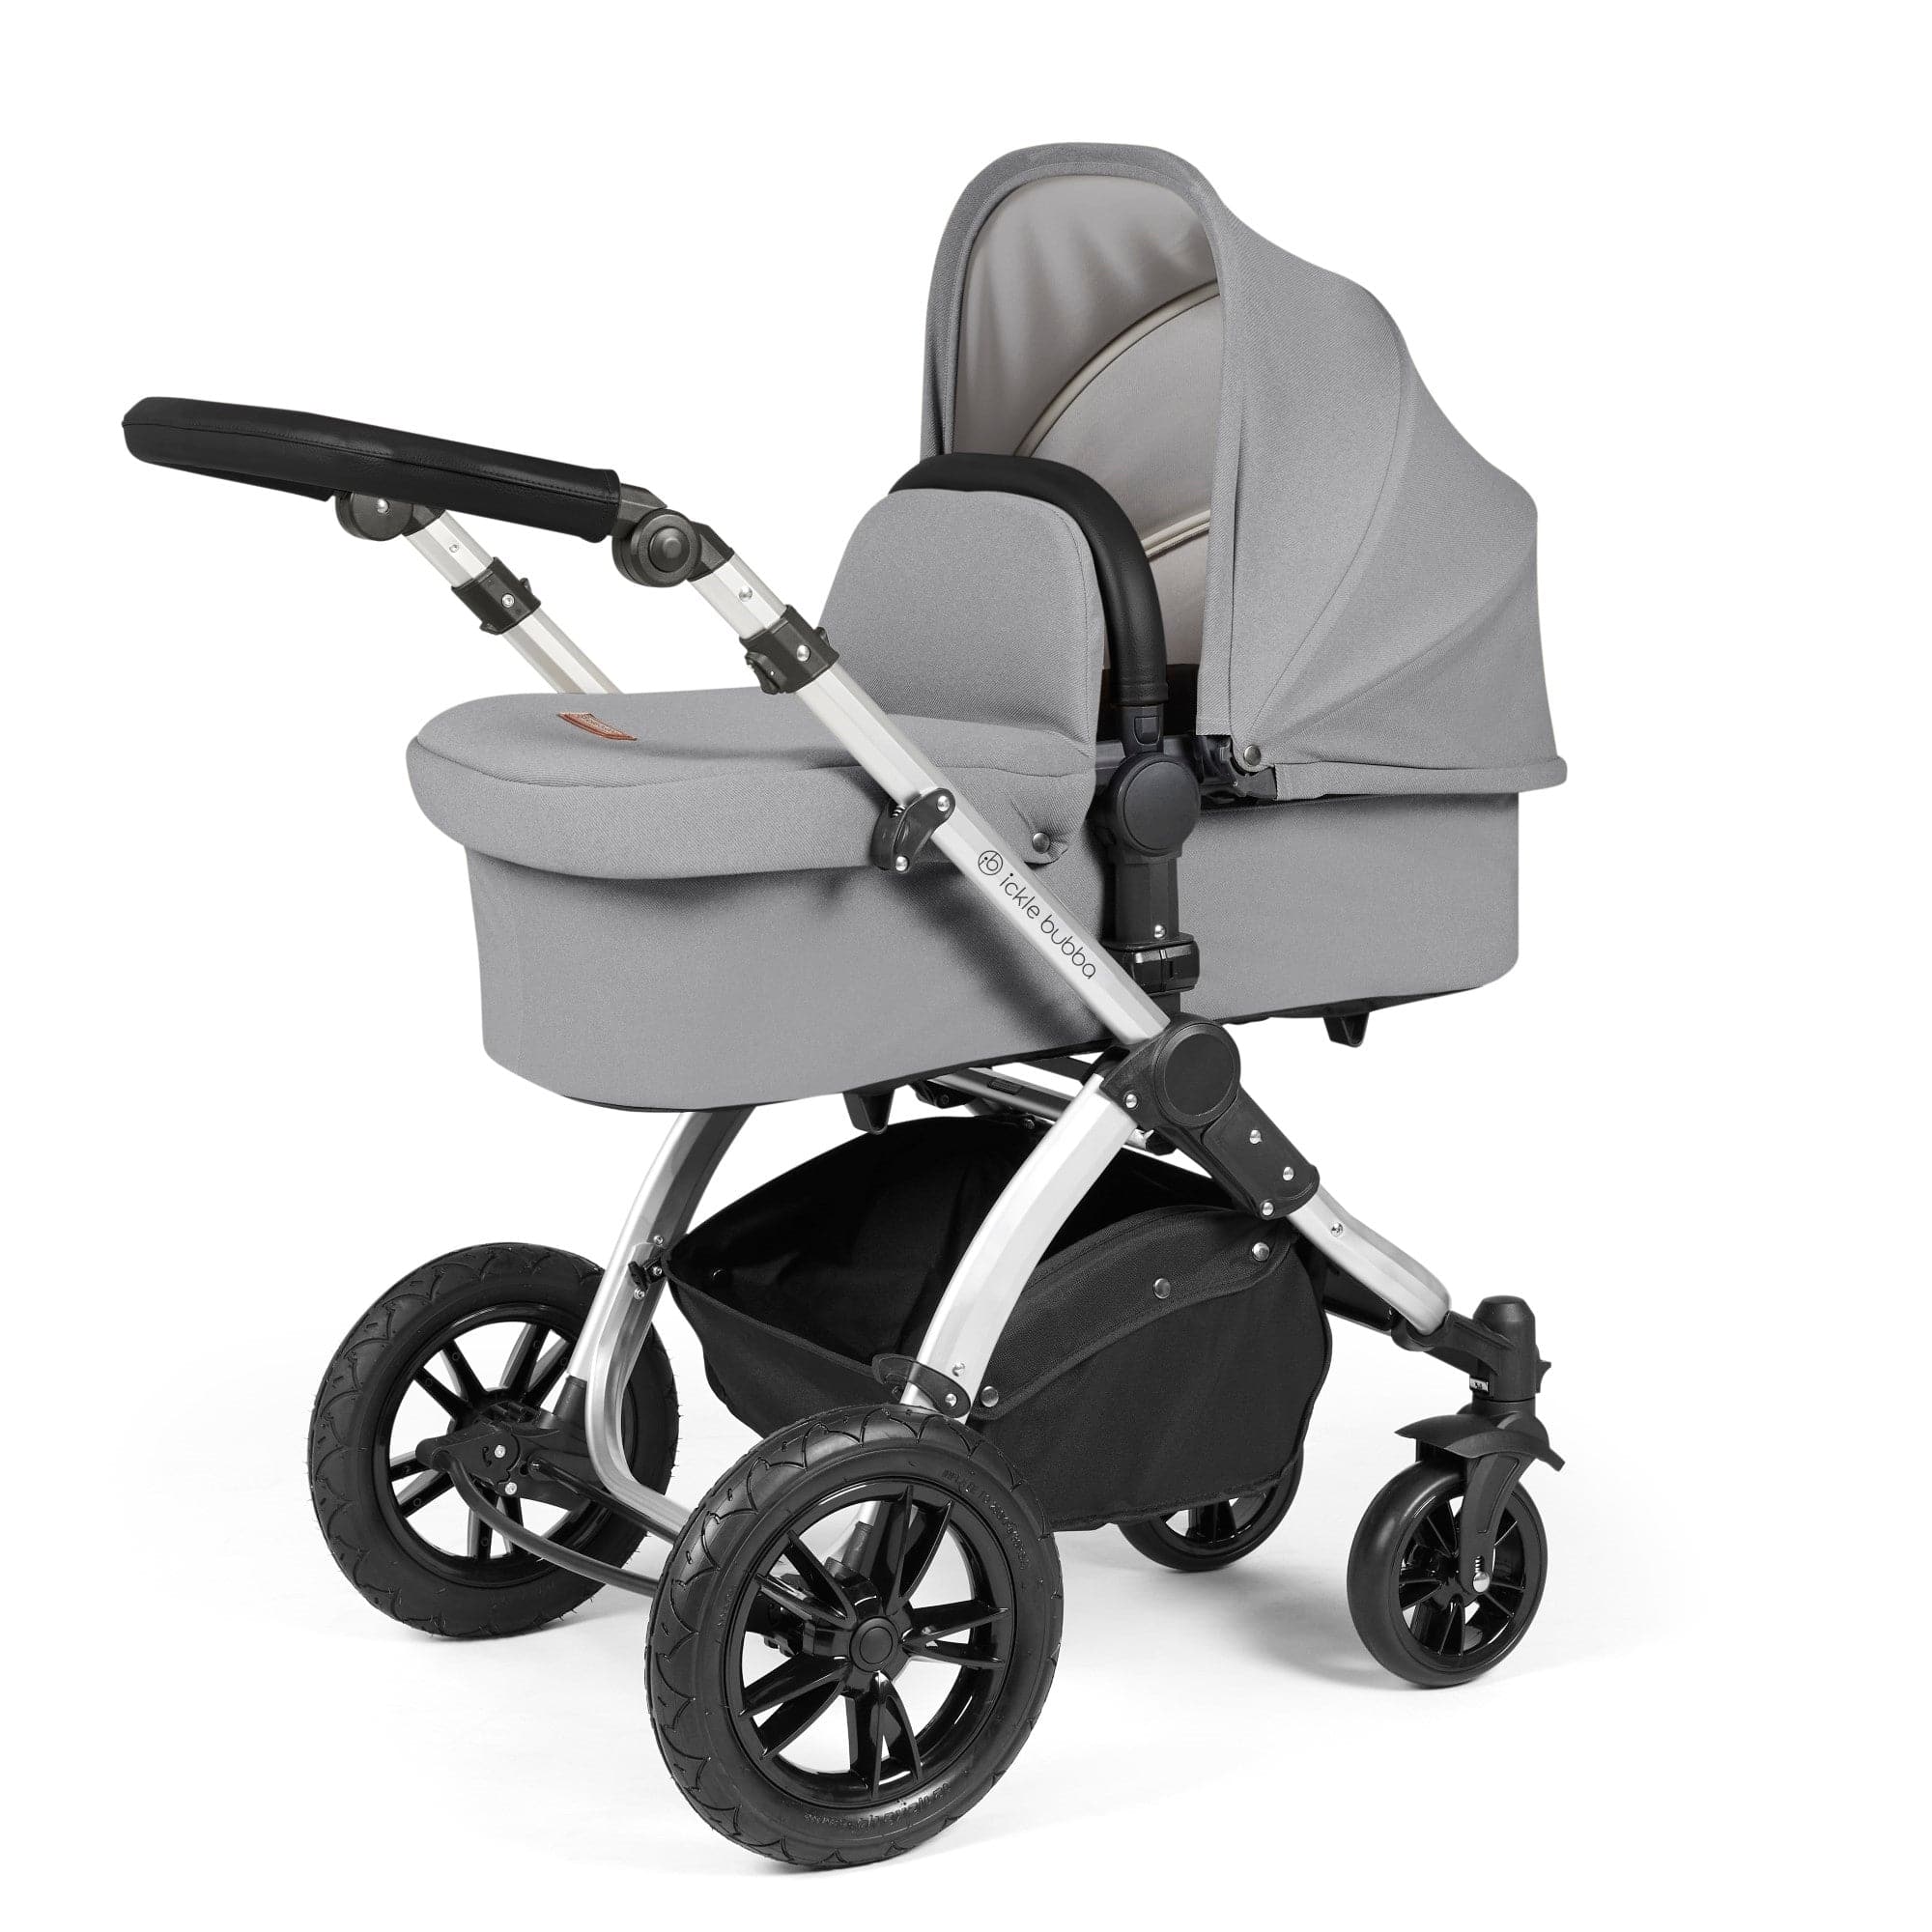 Ickle Bubba Stomp Luxe All-In-One I-Size Travel System With Isofix Base - Silver / Pearl Grey / Black   